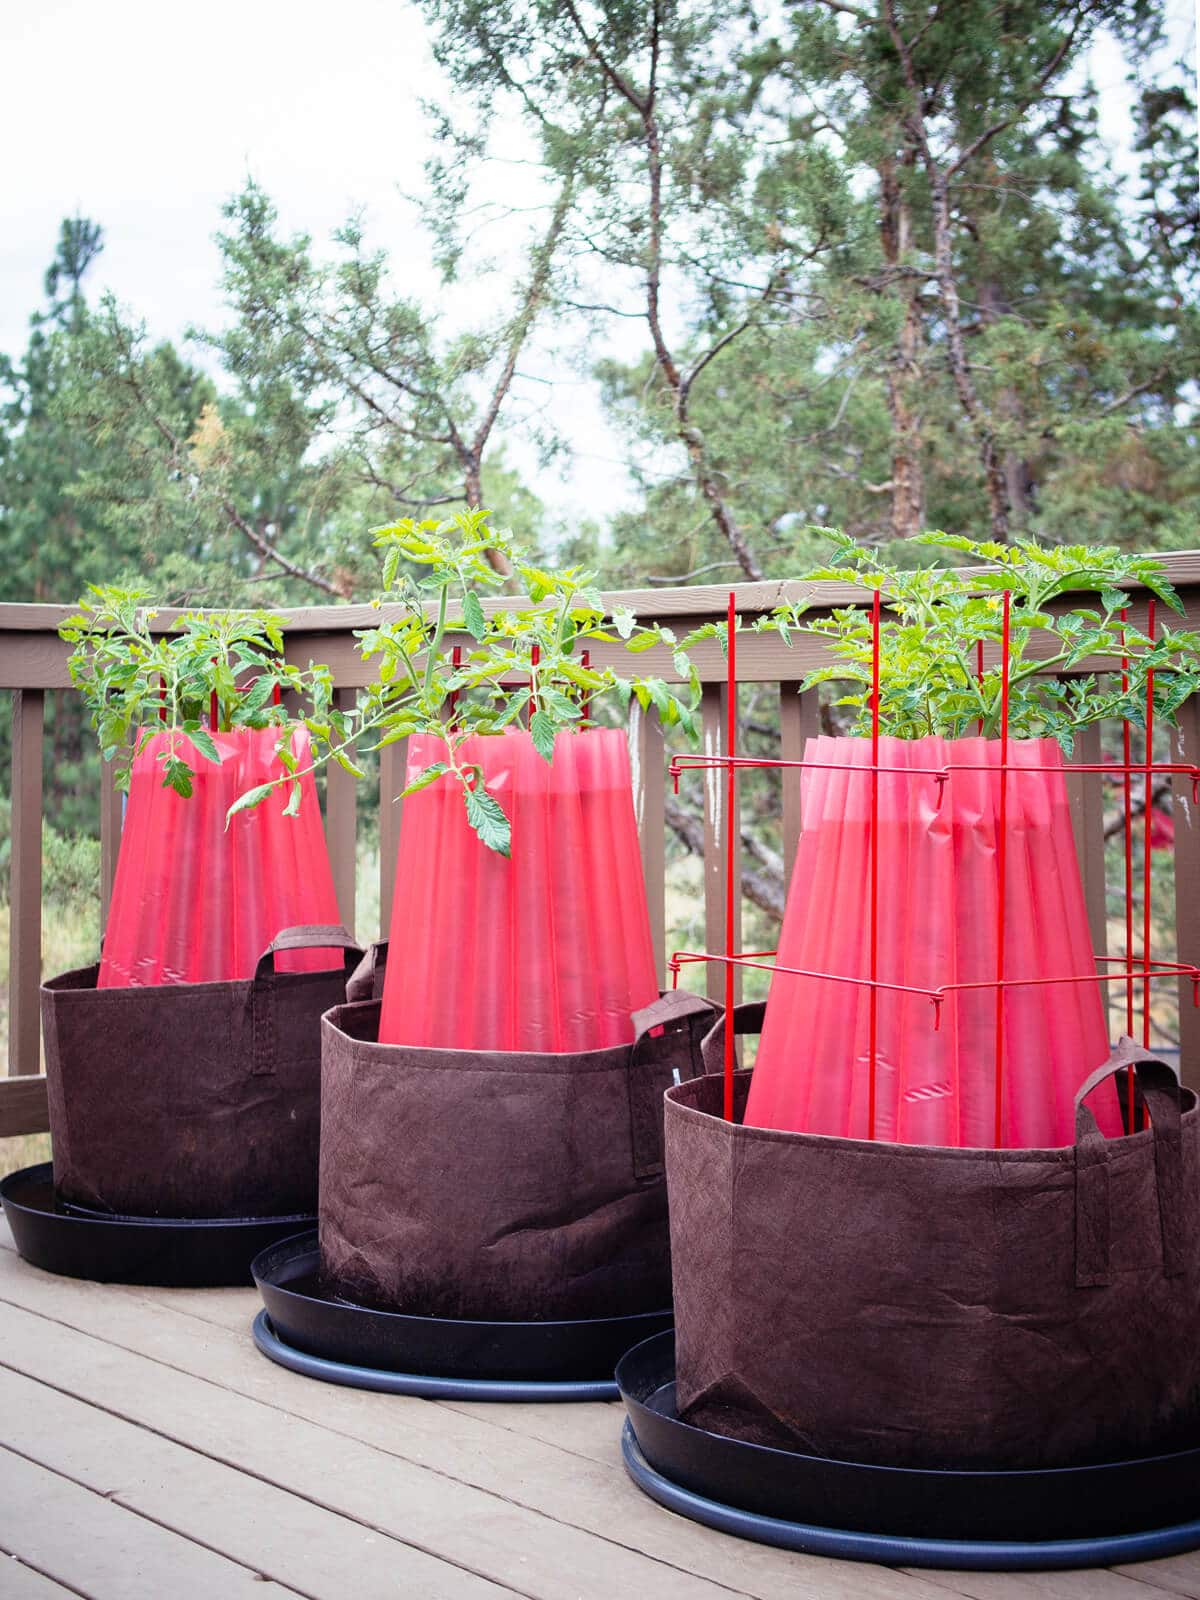 Tomatoes growing in fabric pots with plant teepees for frost protection